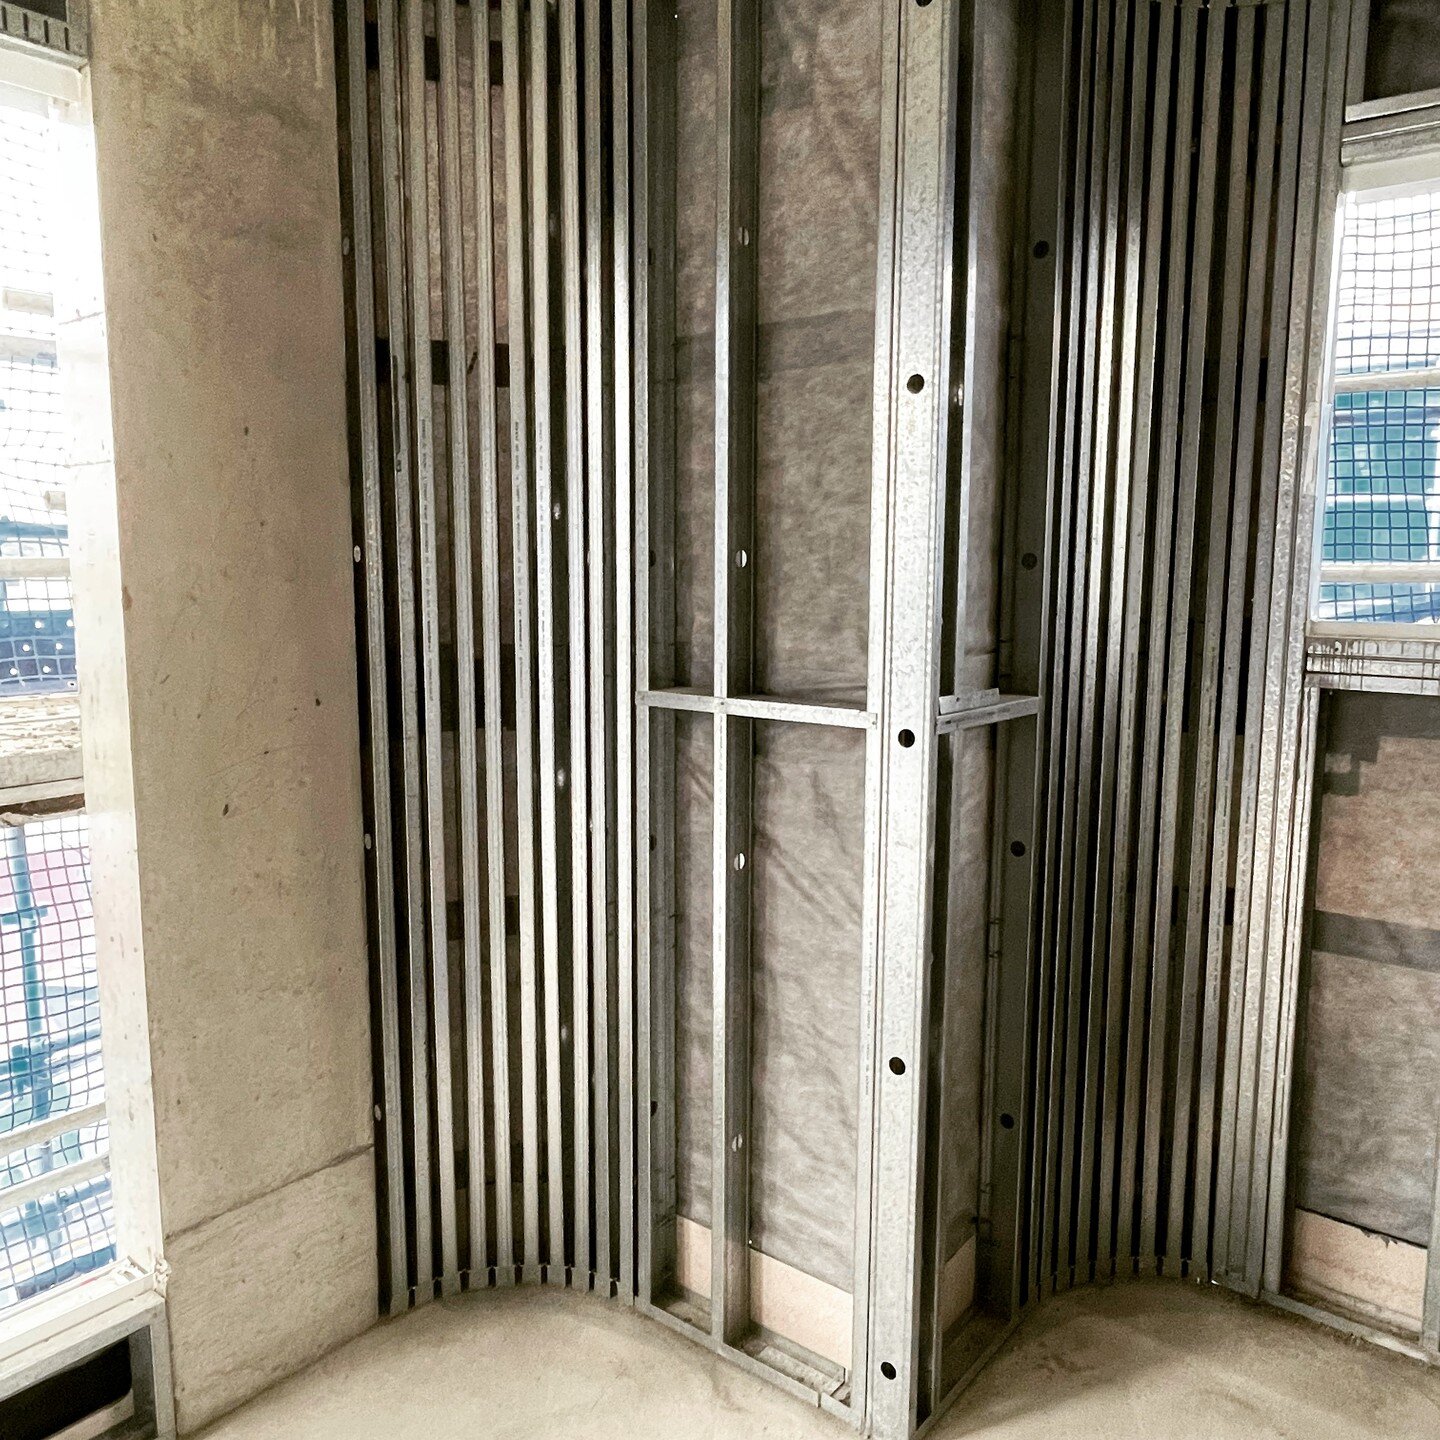 #curves in construction - they are well under-rated. Another #workinprogress by Scope Commercial Construction partnered up with @nhs.trade @hebelaustralia @csrbradford @rondobuildingservices and @make.windows_doors soon to come!